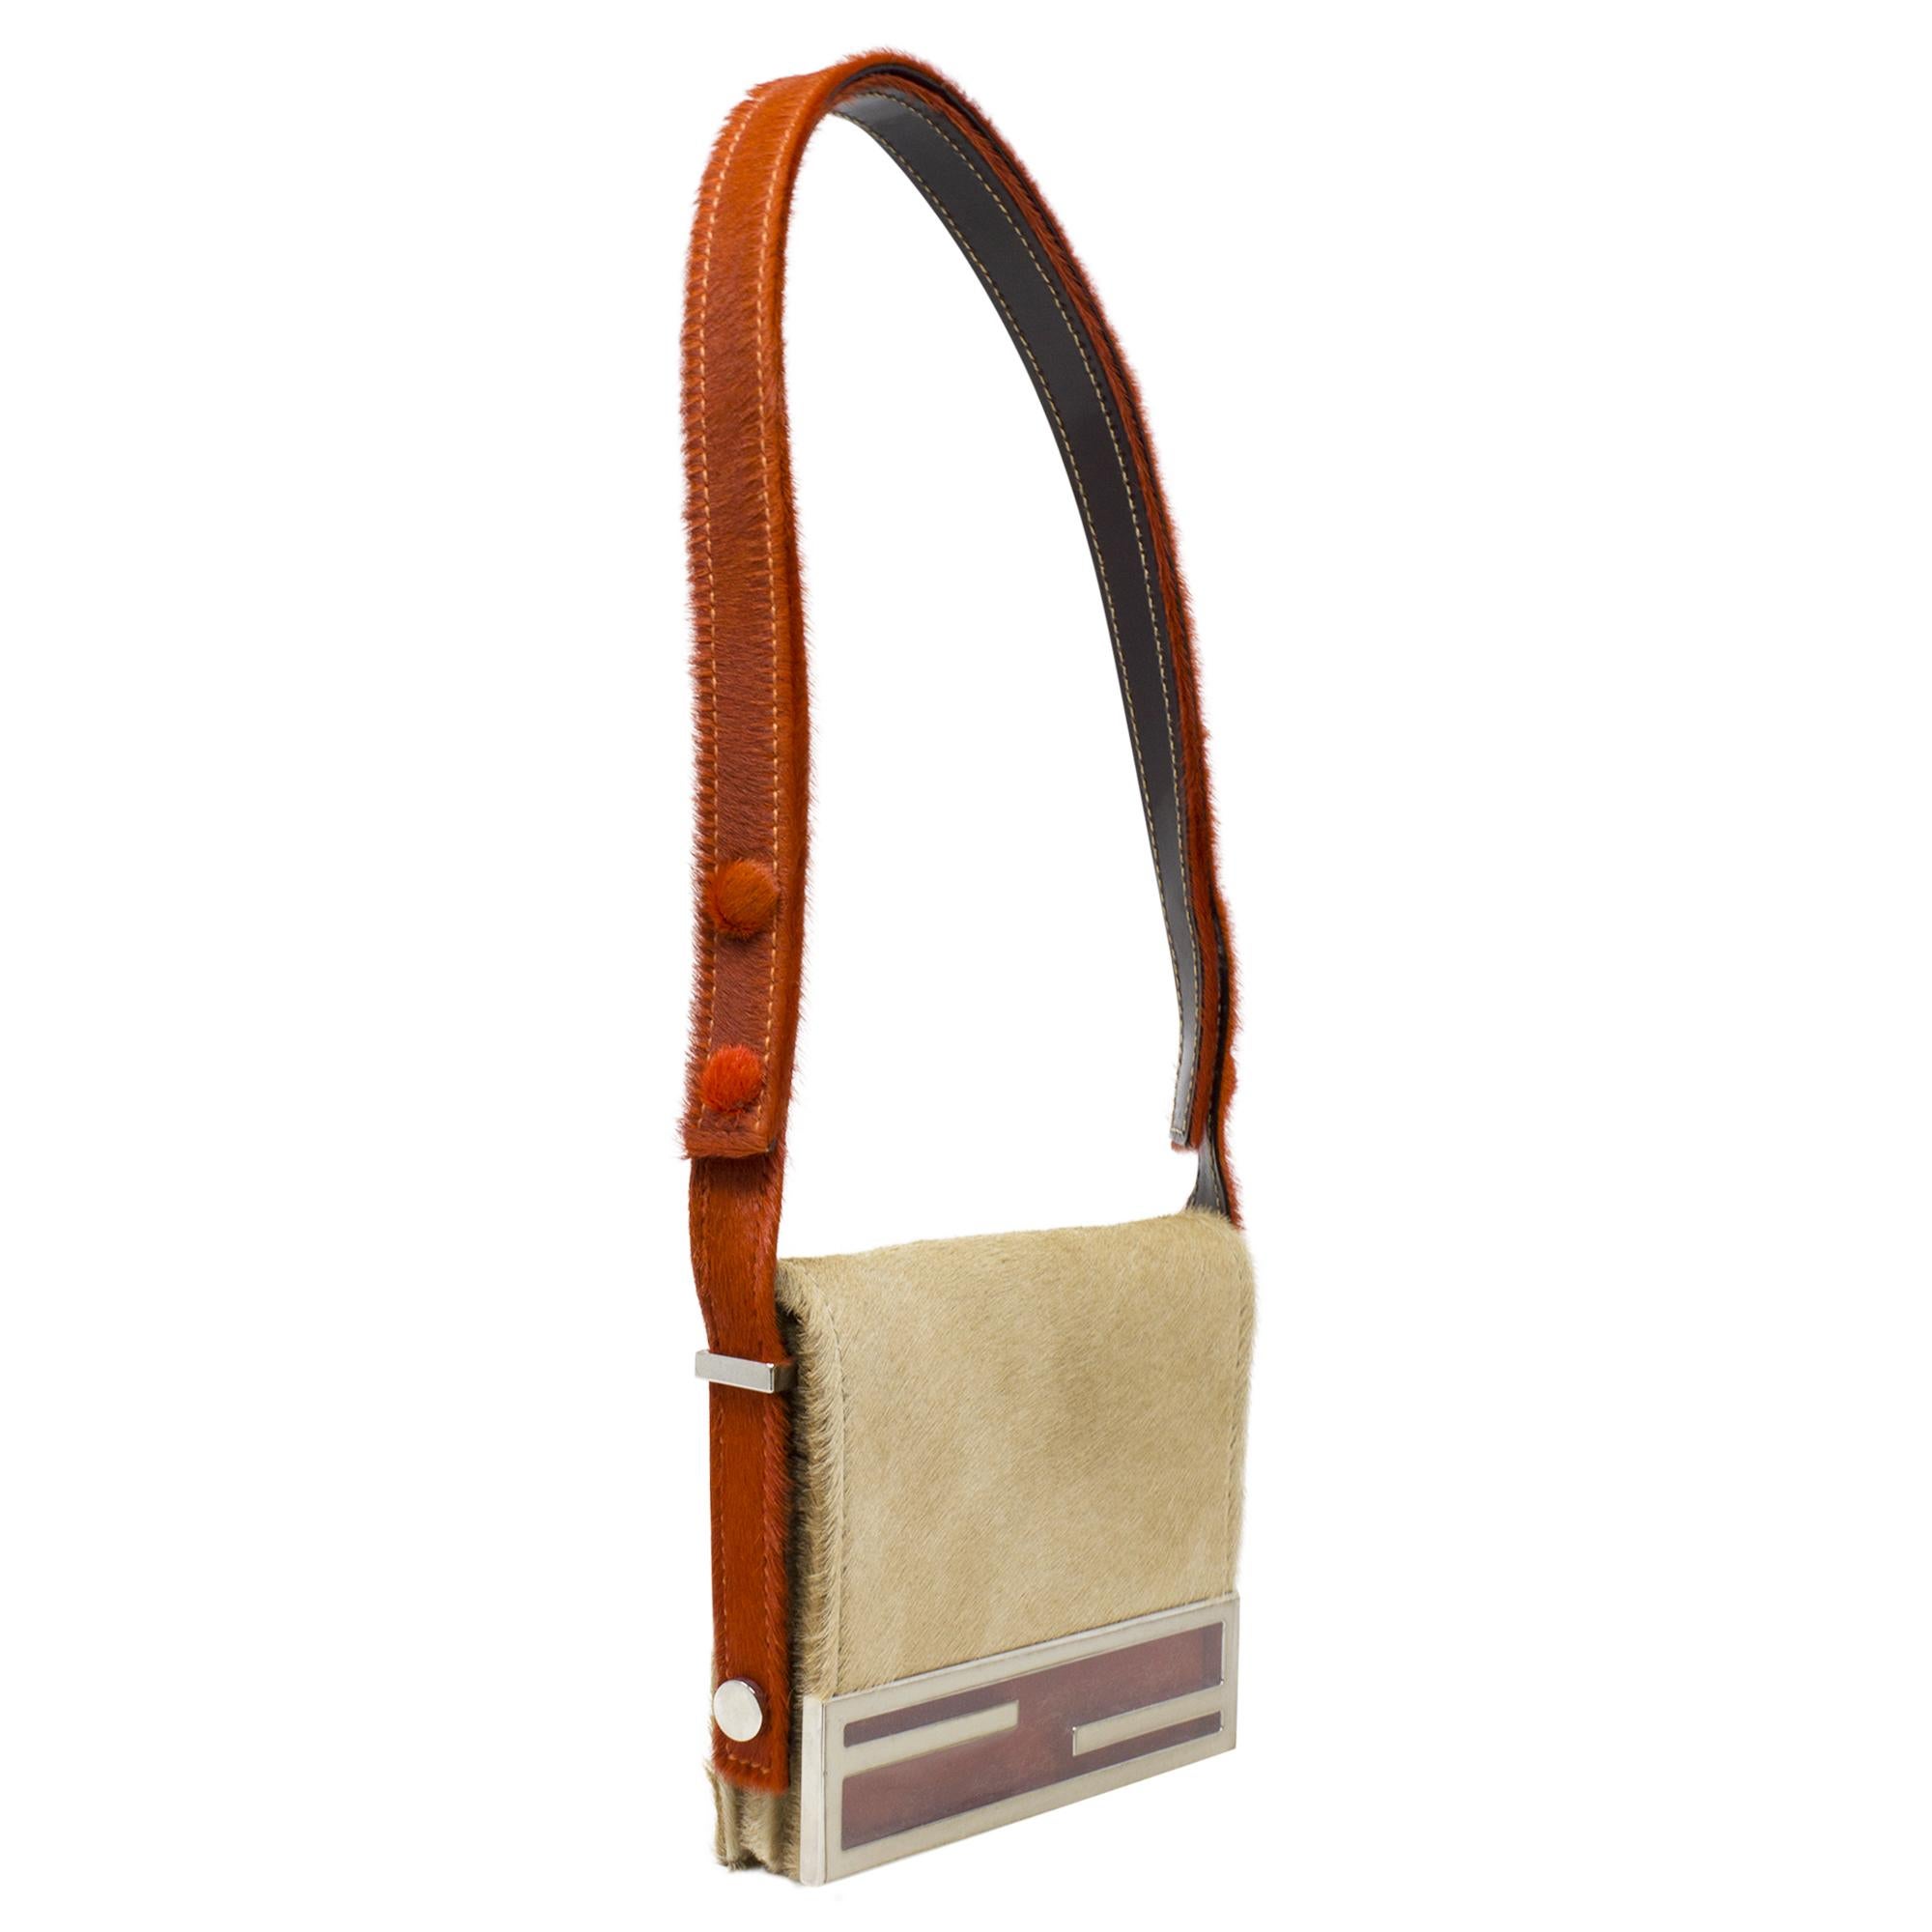 Introducing the Fendi Beige Logo Pony Hair Crossbody, a chic accessory for the fashion-forward individual. Crafted from luxurious beige pony hair fur adorned with Fendi's iconic logo print, this crossbody bag exudes elegance and sophistication. With